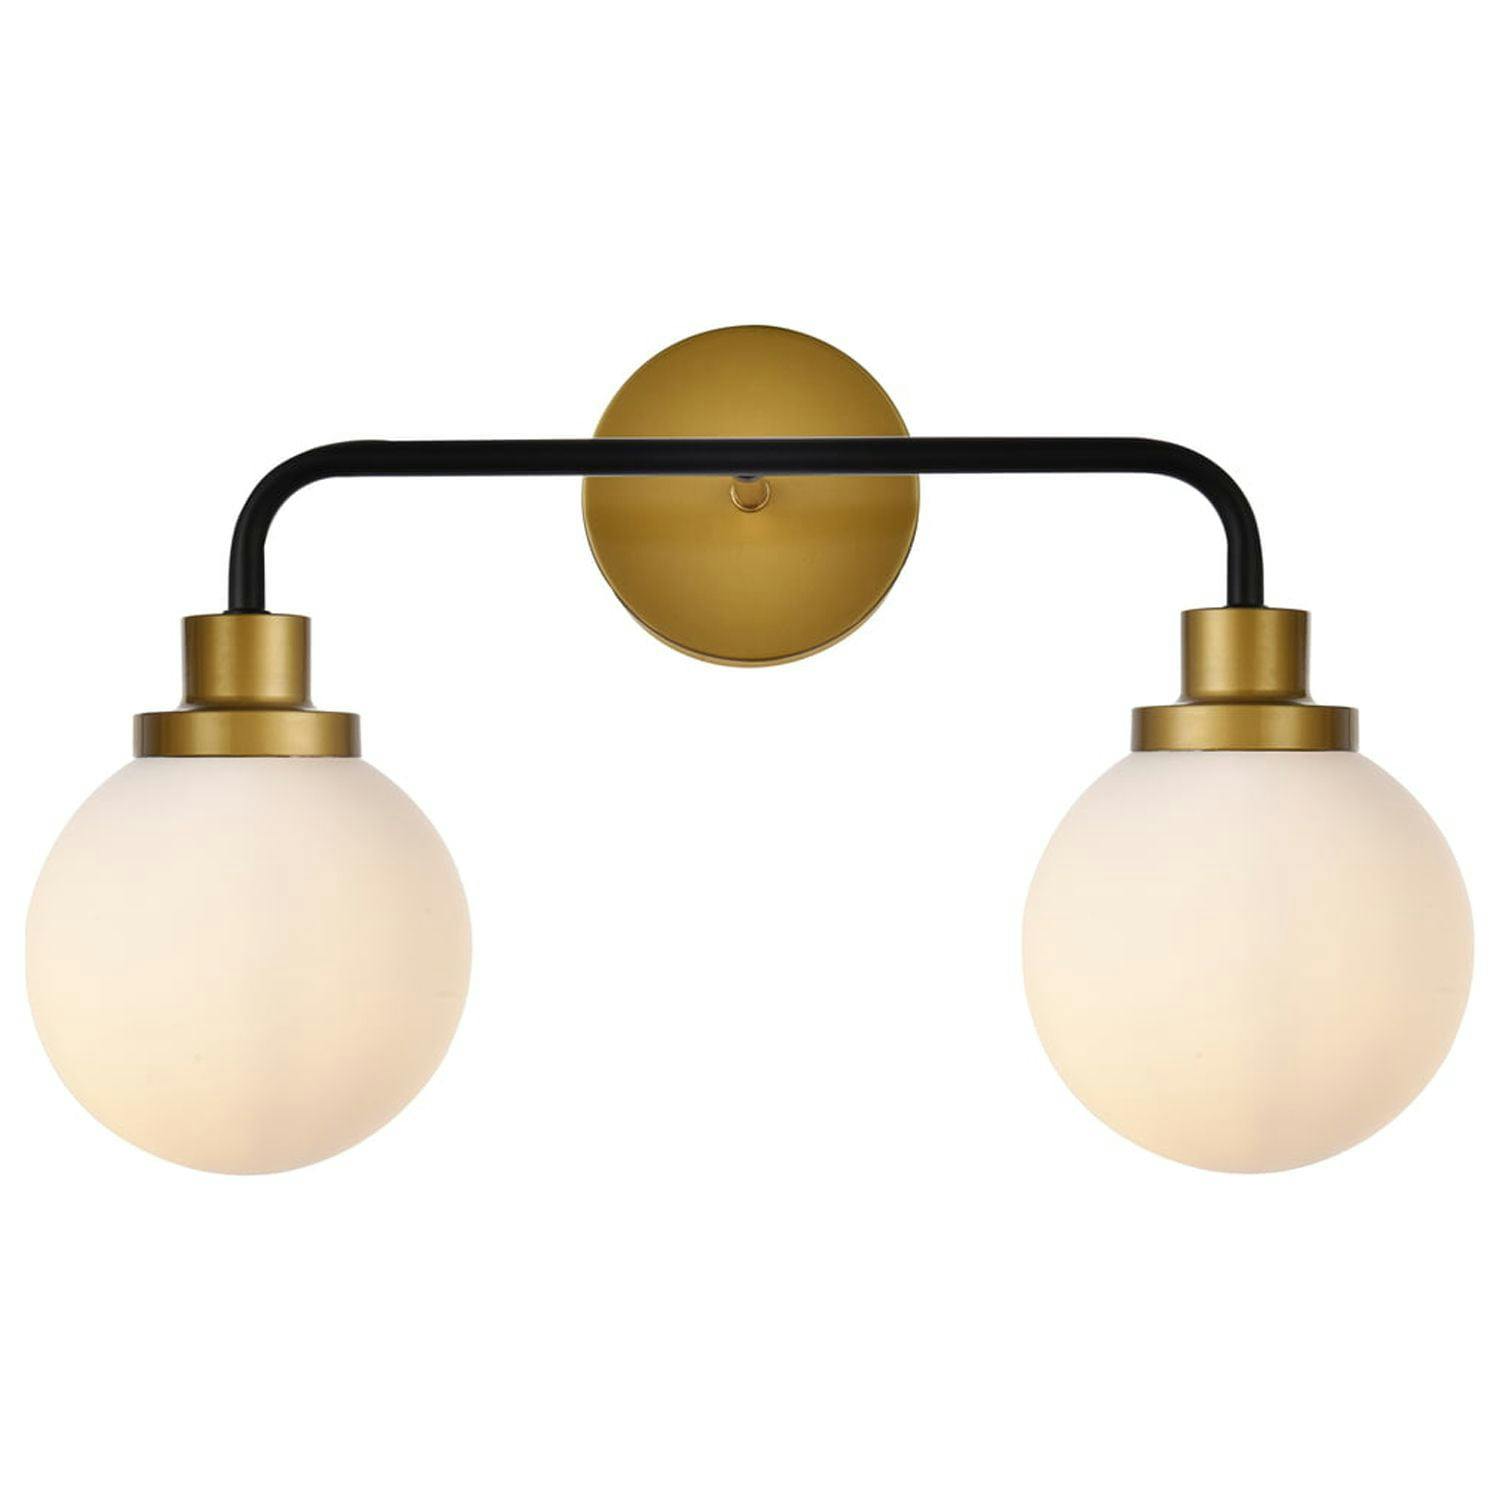 Hanson Dual-Light Bath Sconce with Black, Brass, and Frosted Glass